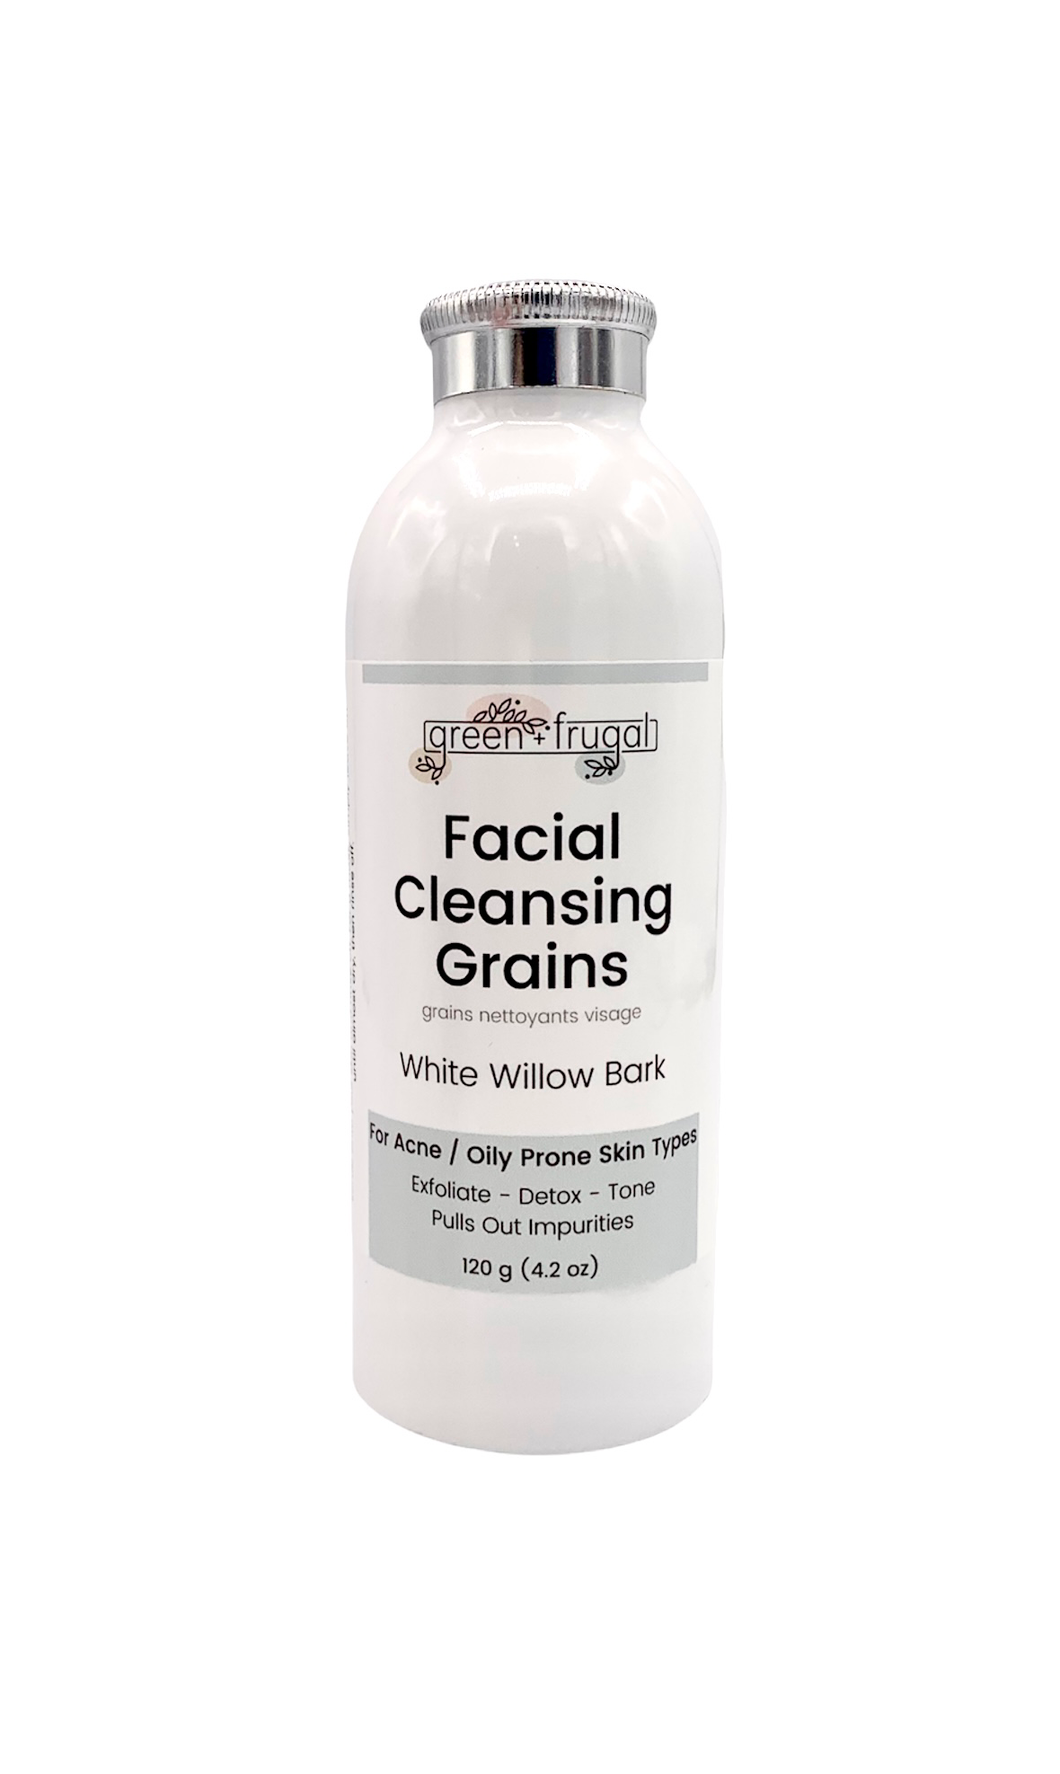 Facial Cleansing Grains Acne/Oily